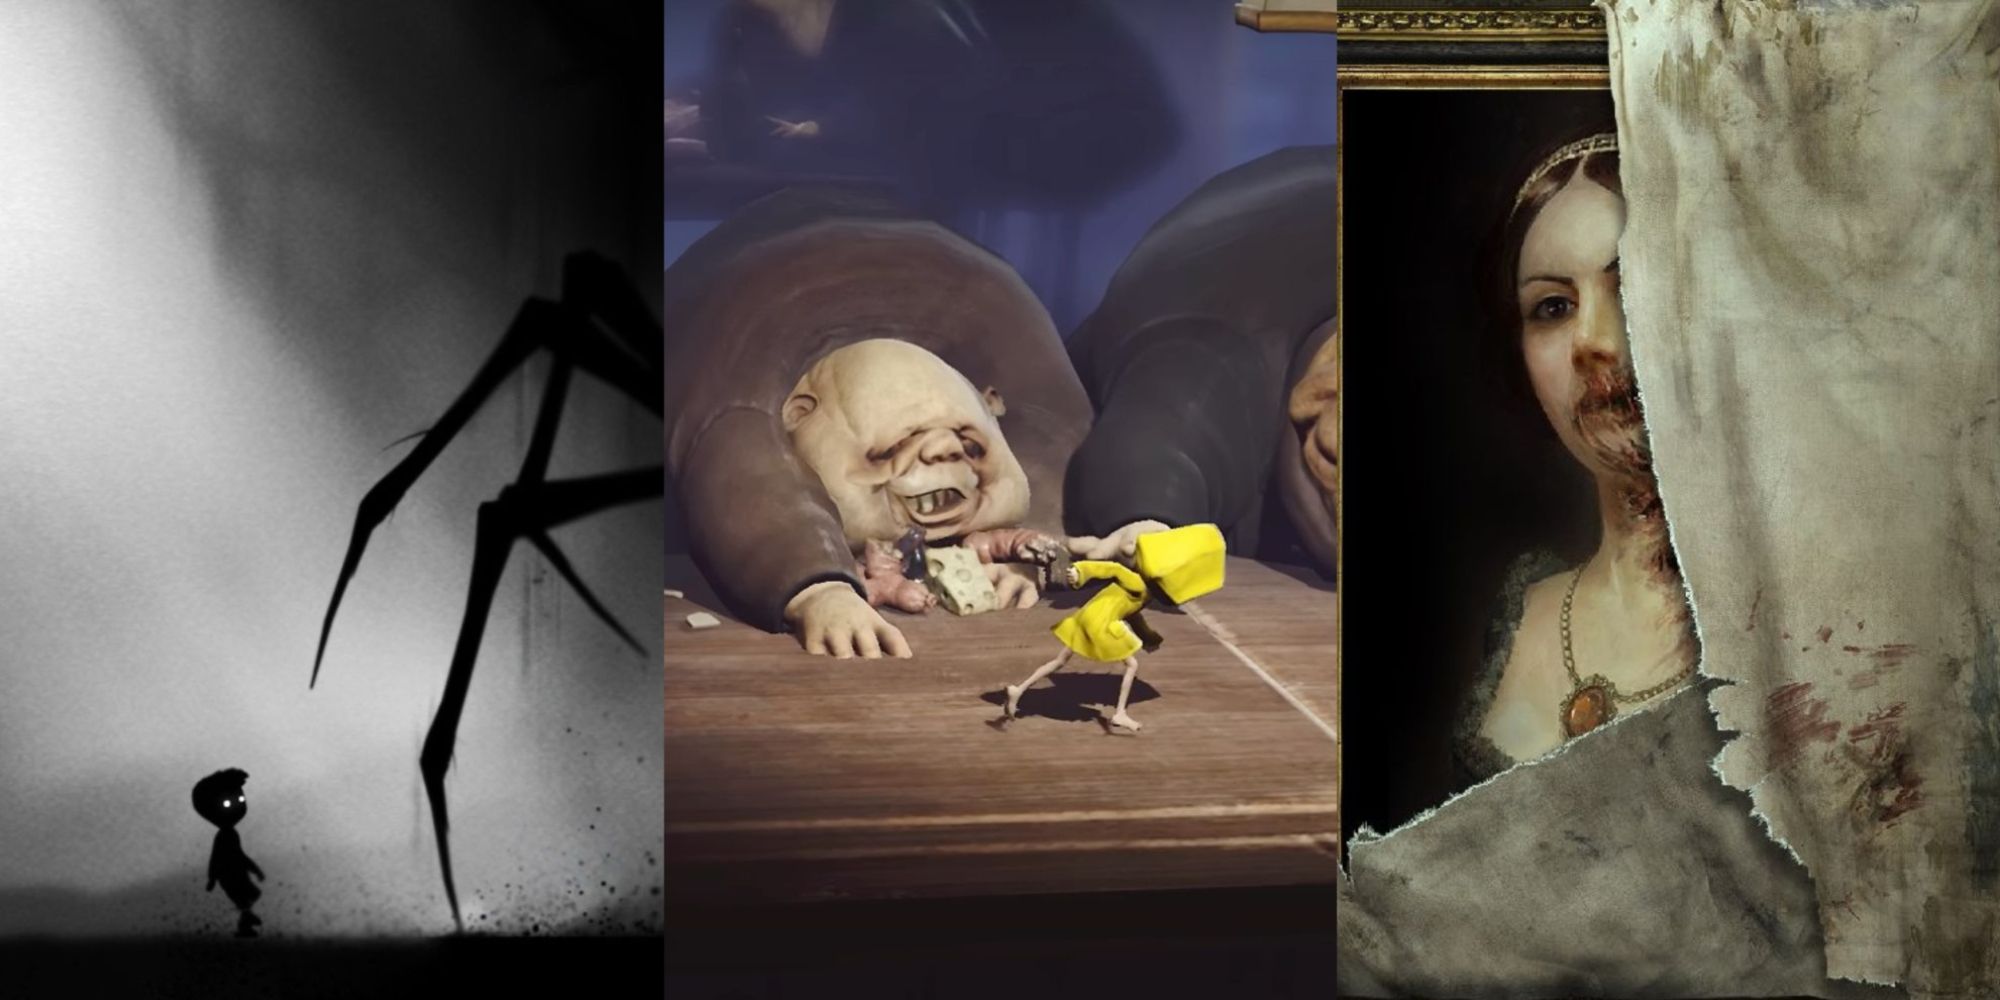 Horror Puzzle Games Featured Split Image Limbo, Little Nightmares, and Layer Of Fear